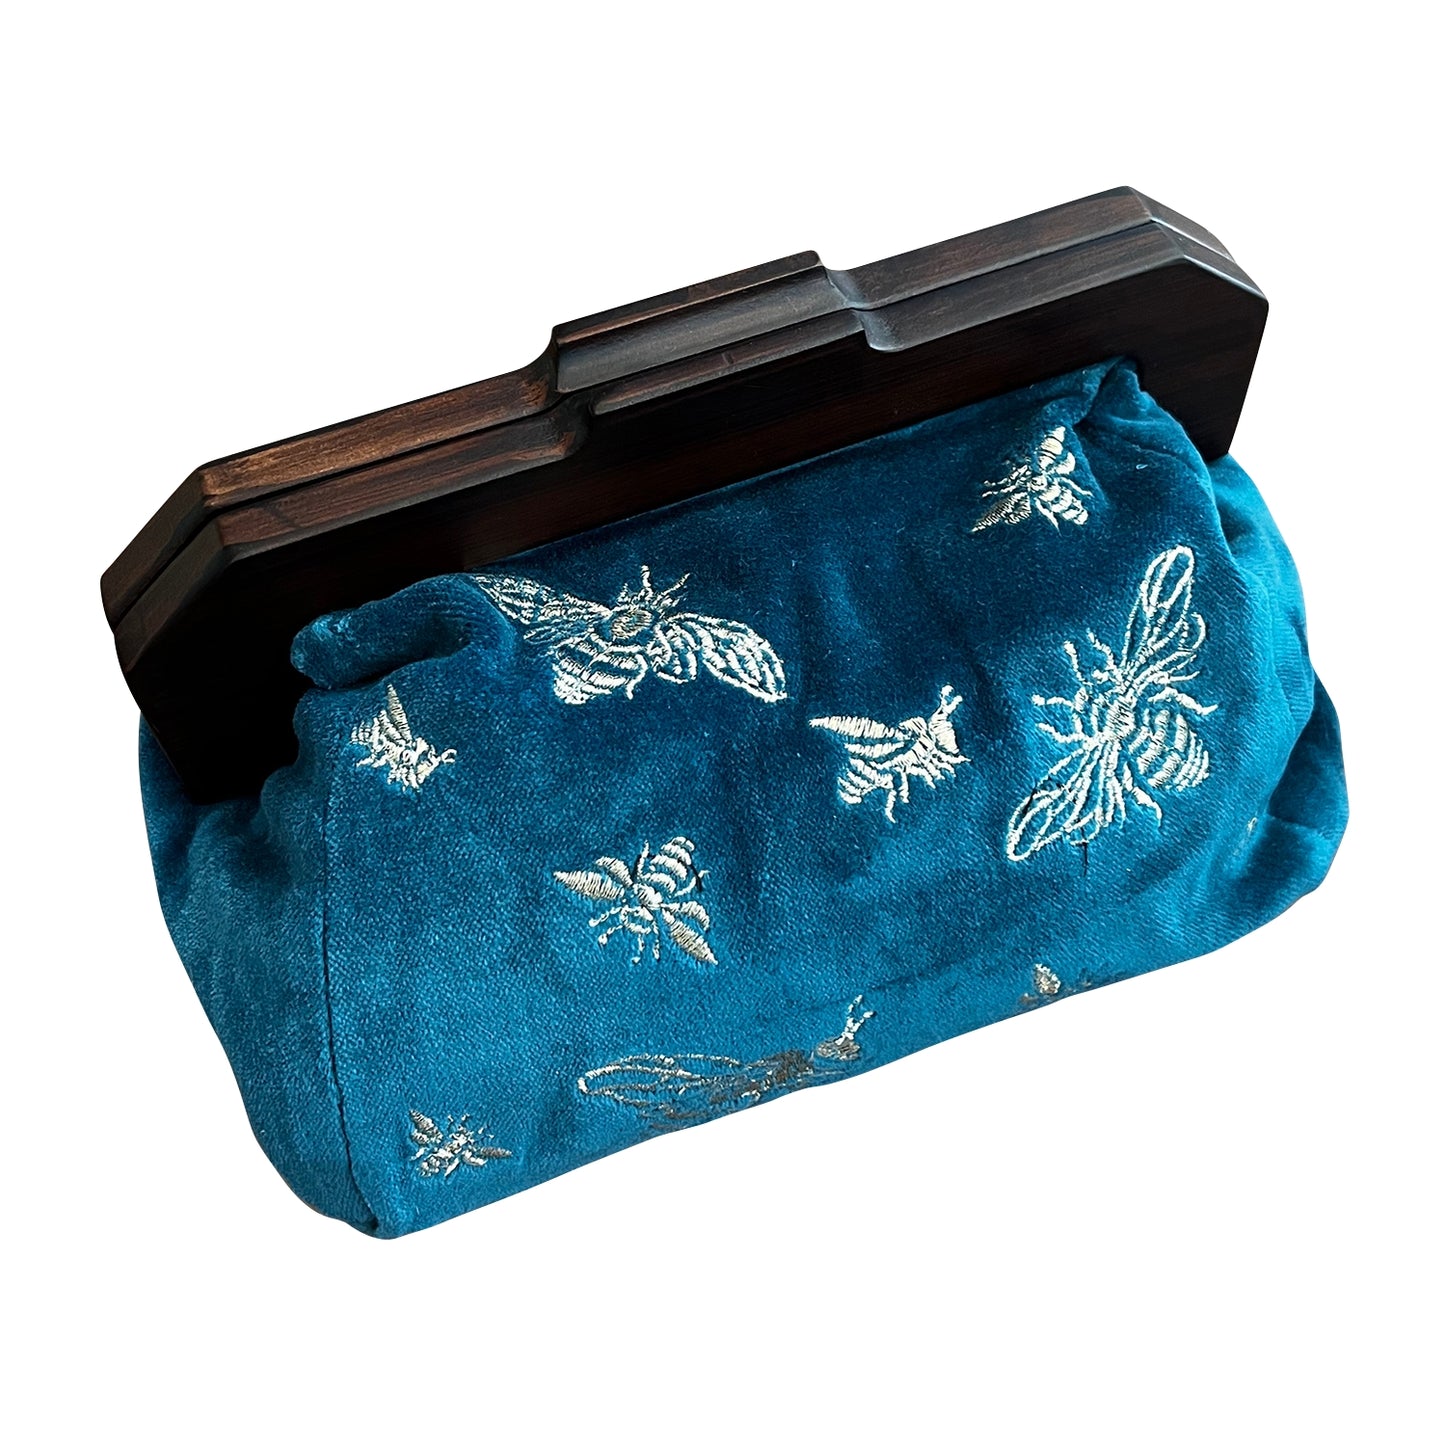 Bees on Royal Blue Velvet Clutch with Wooden Handle